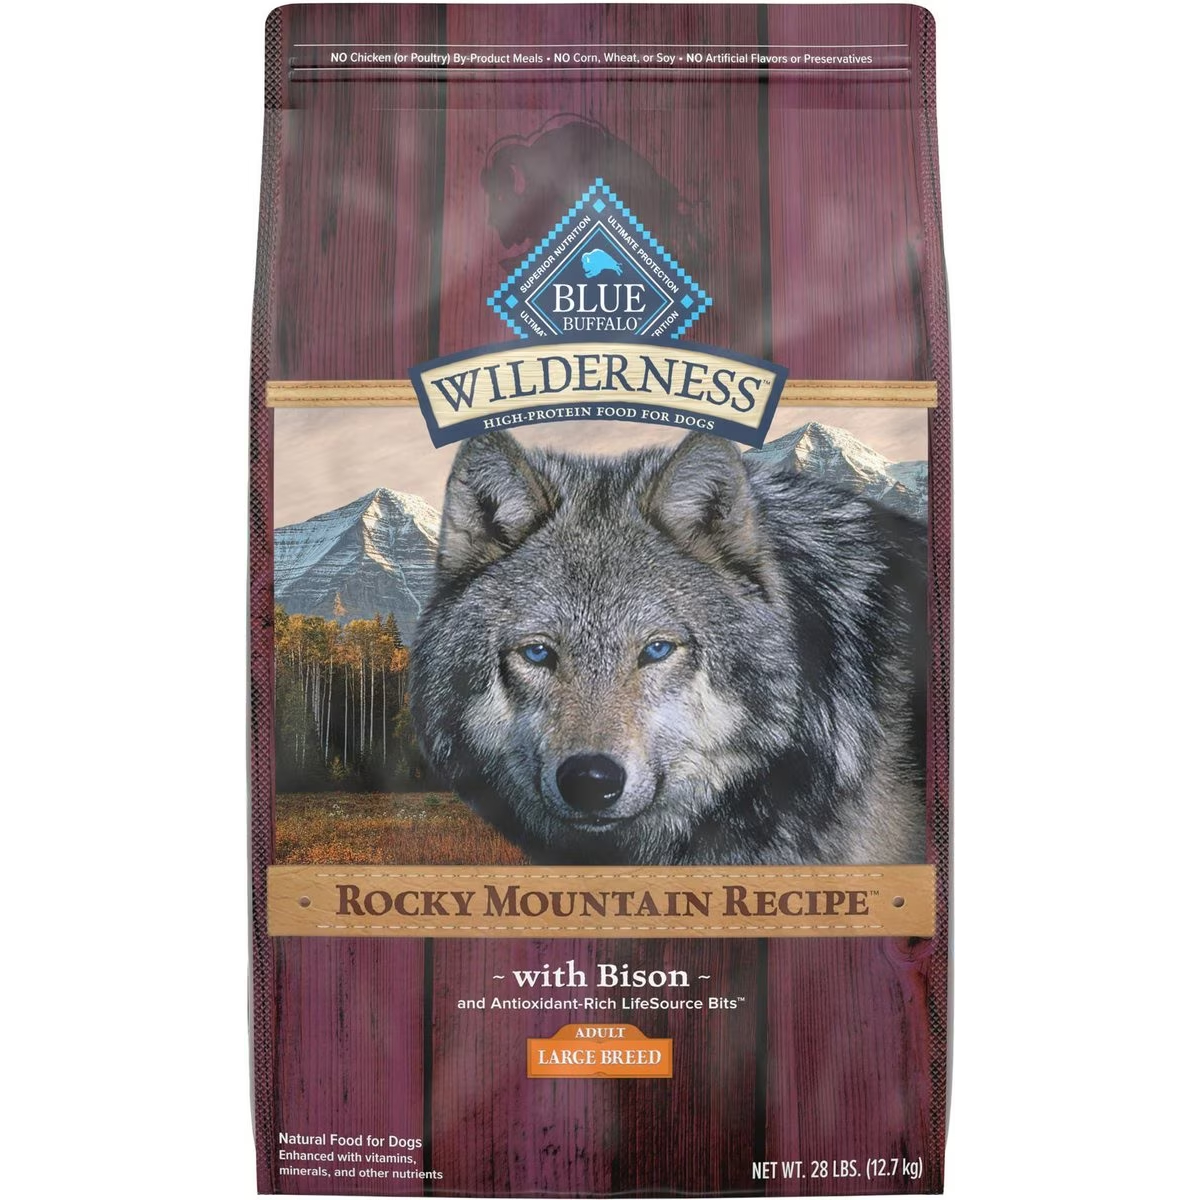 Blue Buffalo Wilderness Rocky Mountain Recipe Large Breed Adult High Protein Natural Bison & Grain Dry Dog Food